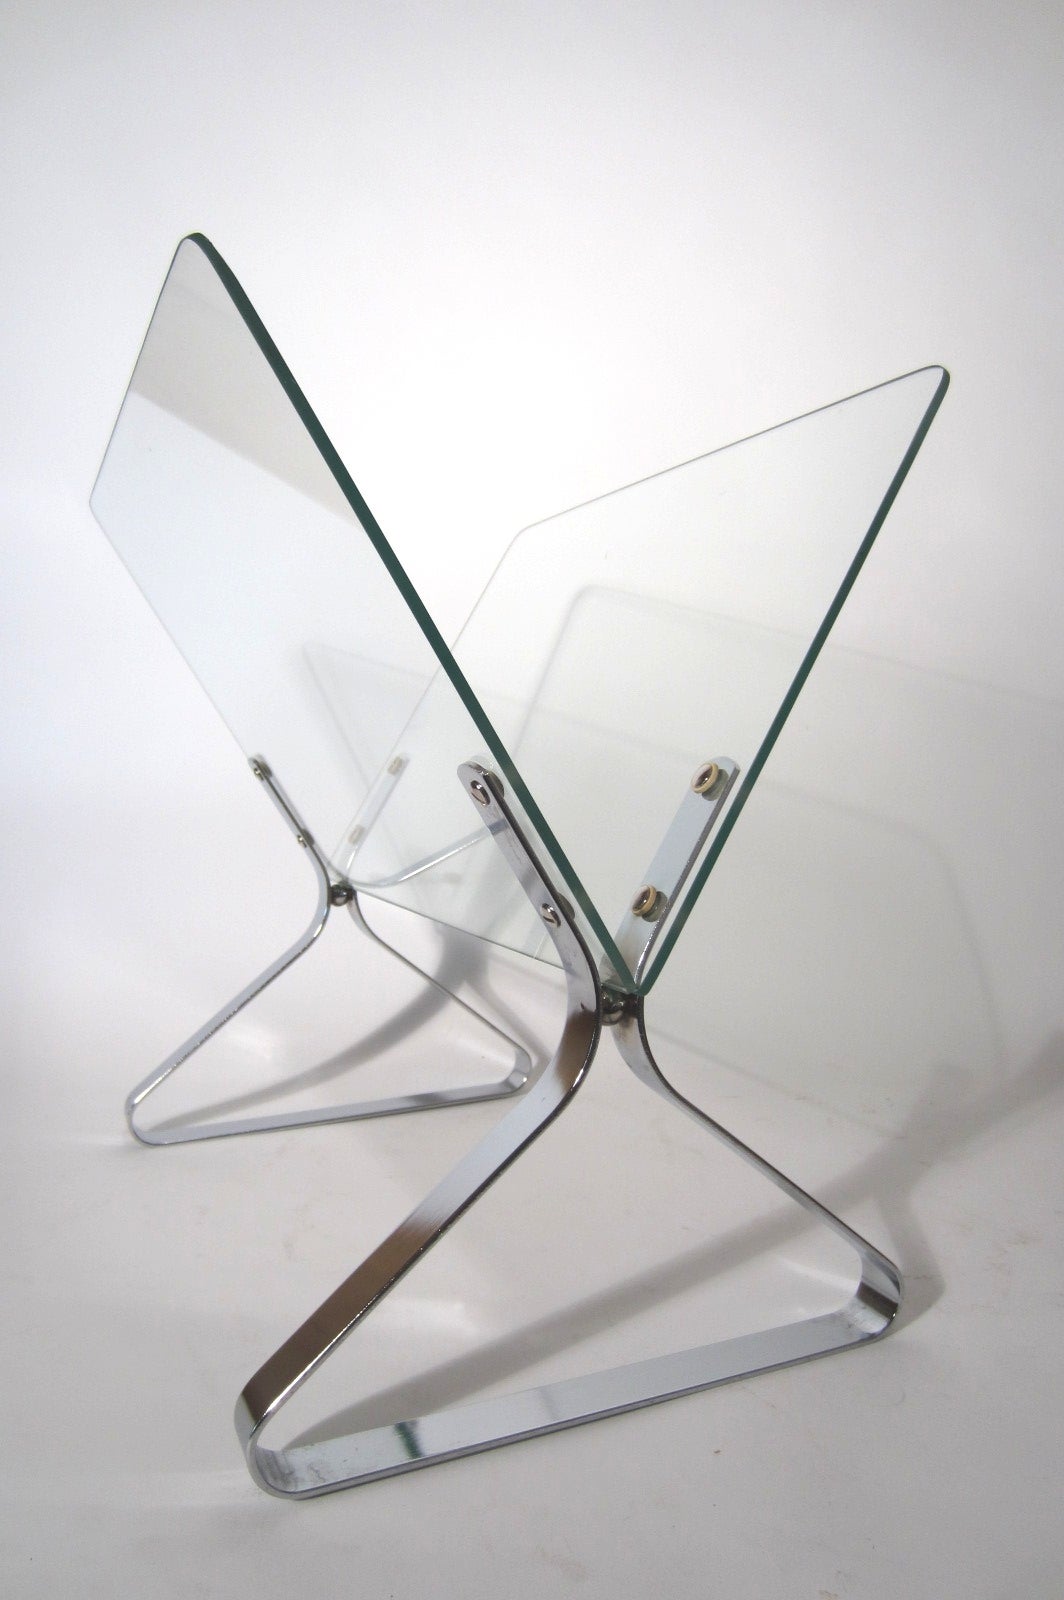 Late 20th Century Mid-Century Modern Chrome and Glass Magazine Stand Attributed to Milo Baughman